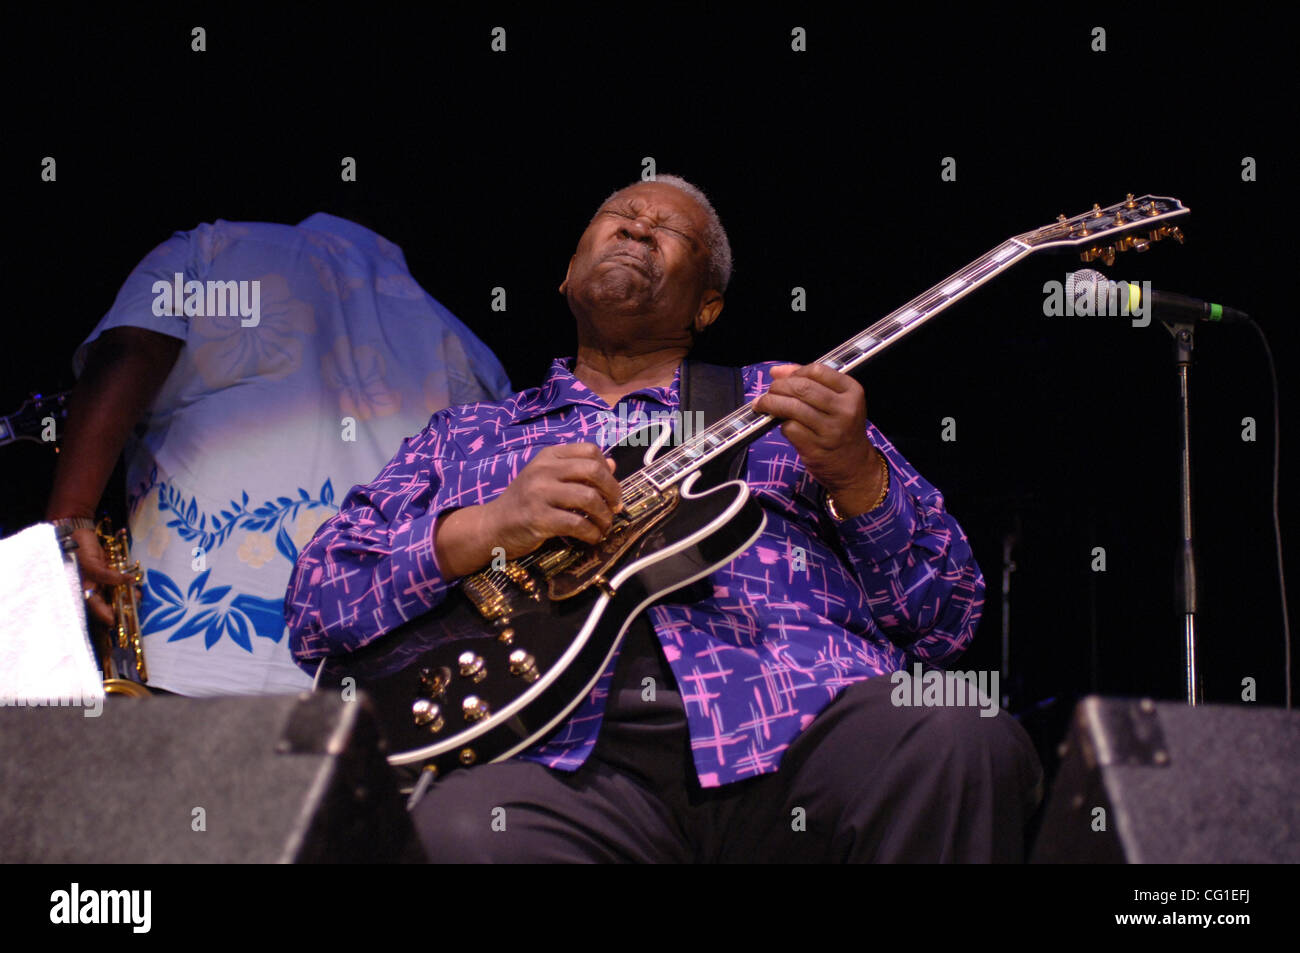 Aug 10, 2007 - Portsmouth, VA, USA - Bluse legend and multi Grammy winner B.B. KING brings the blues out on a hot August night at the Netelos Pavilion. (Credit Image: © Jeff Moore/ZUMA Press) Stock Photo